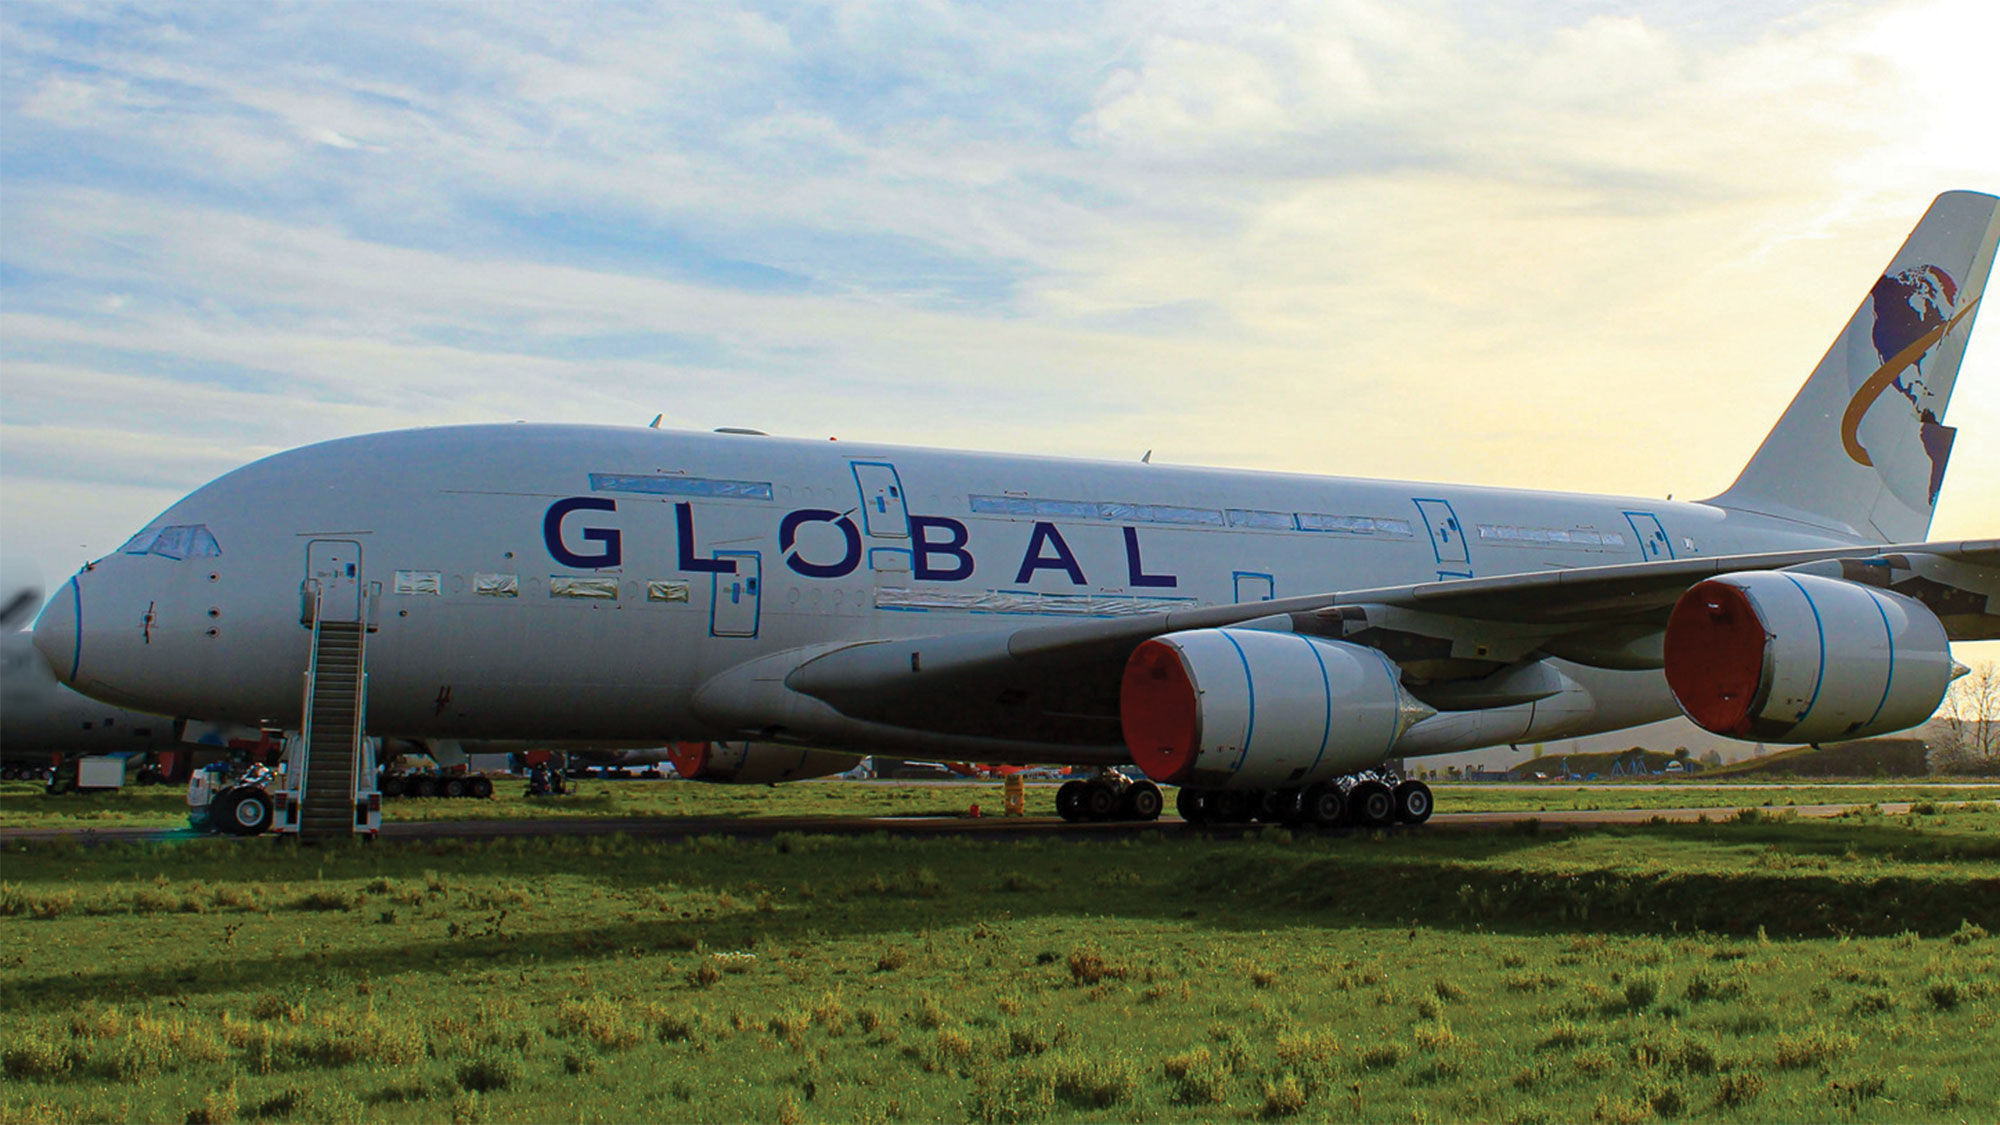 Global Airlines hopes to bring glamour to the skies with its Airbus A380s.